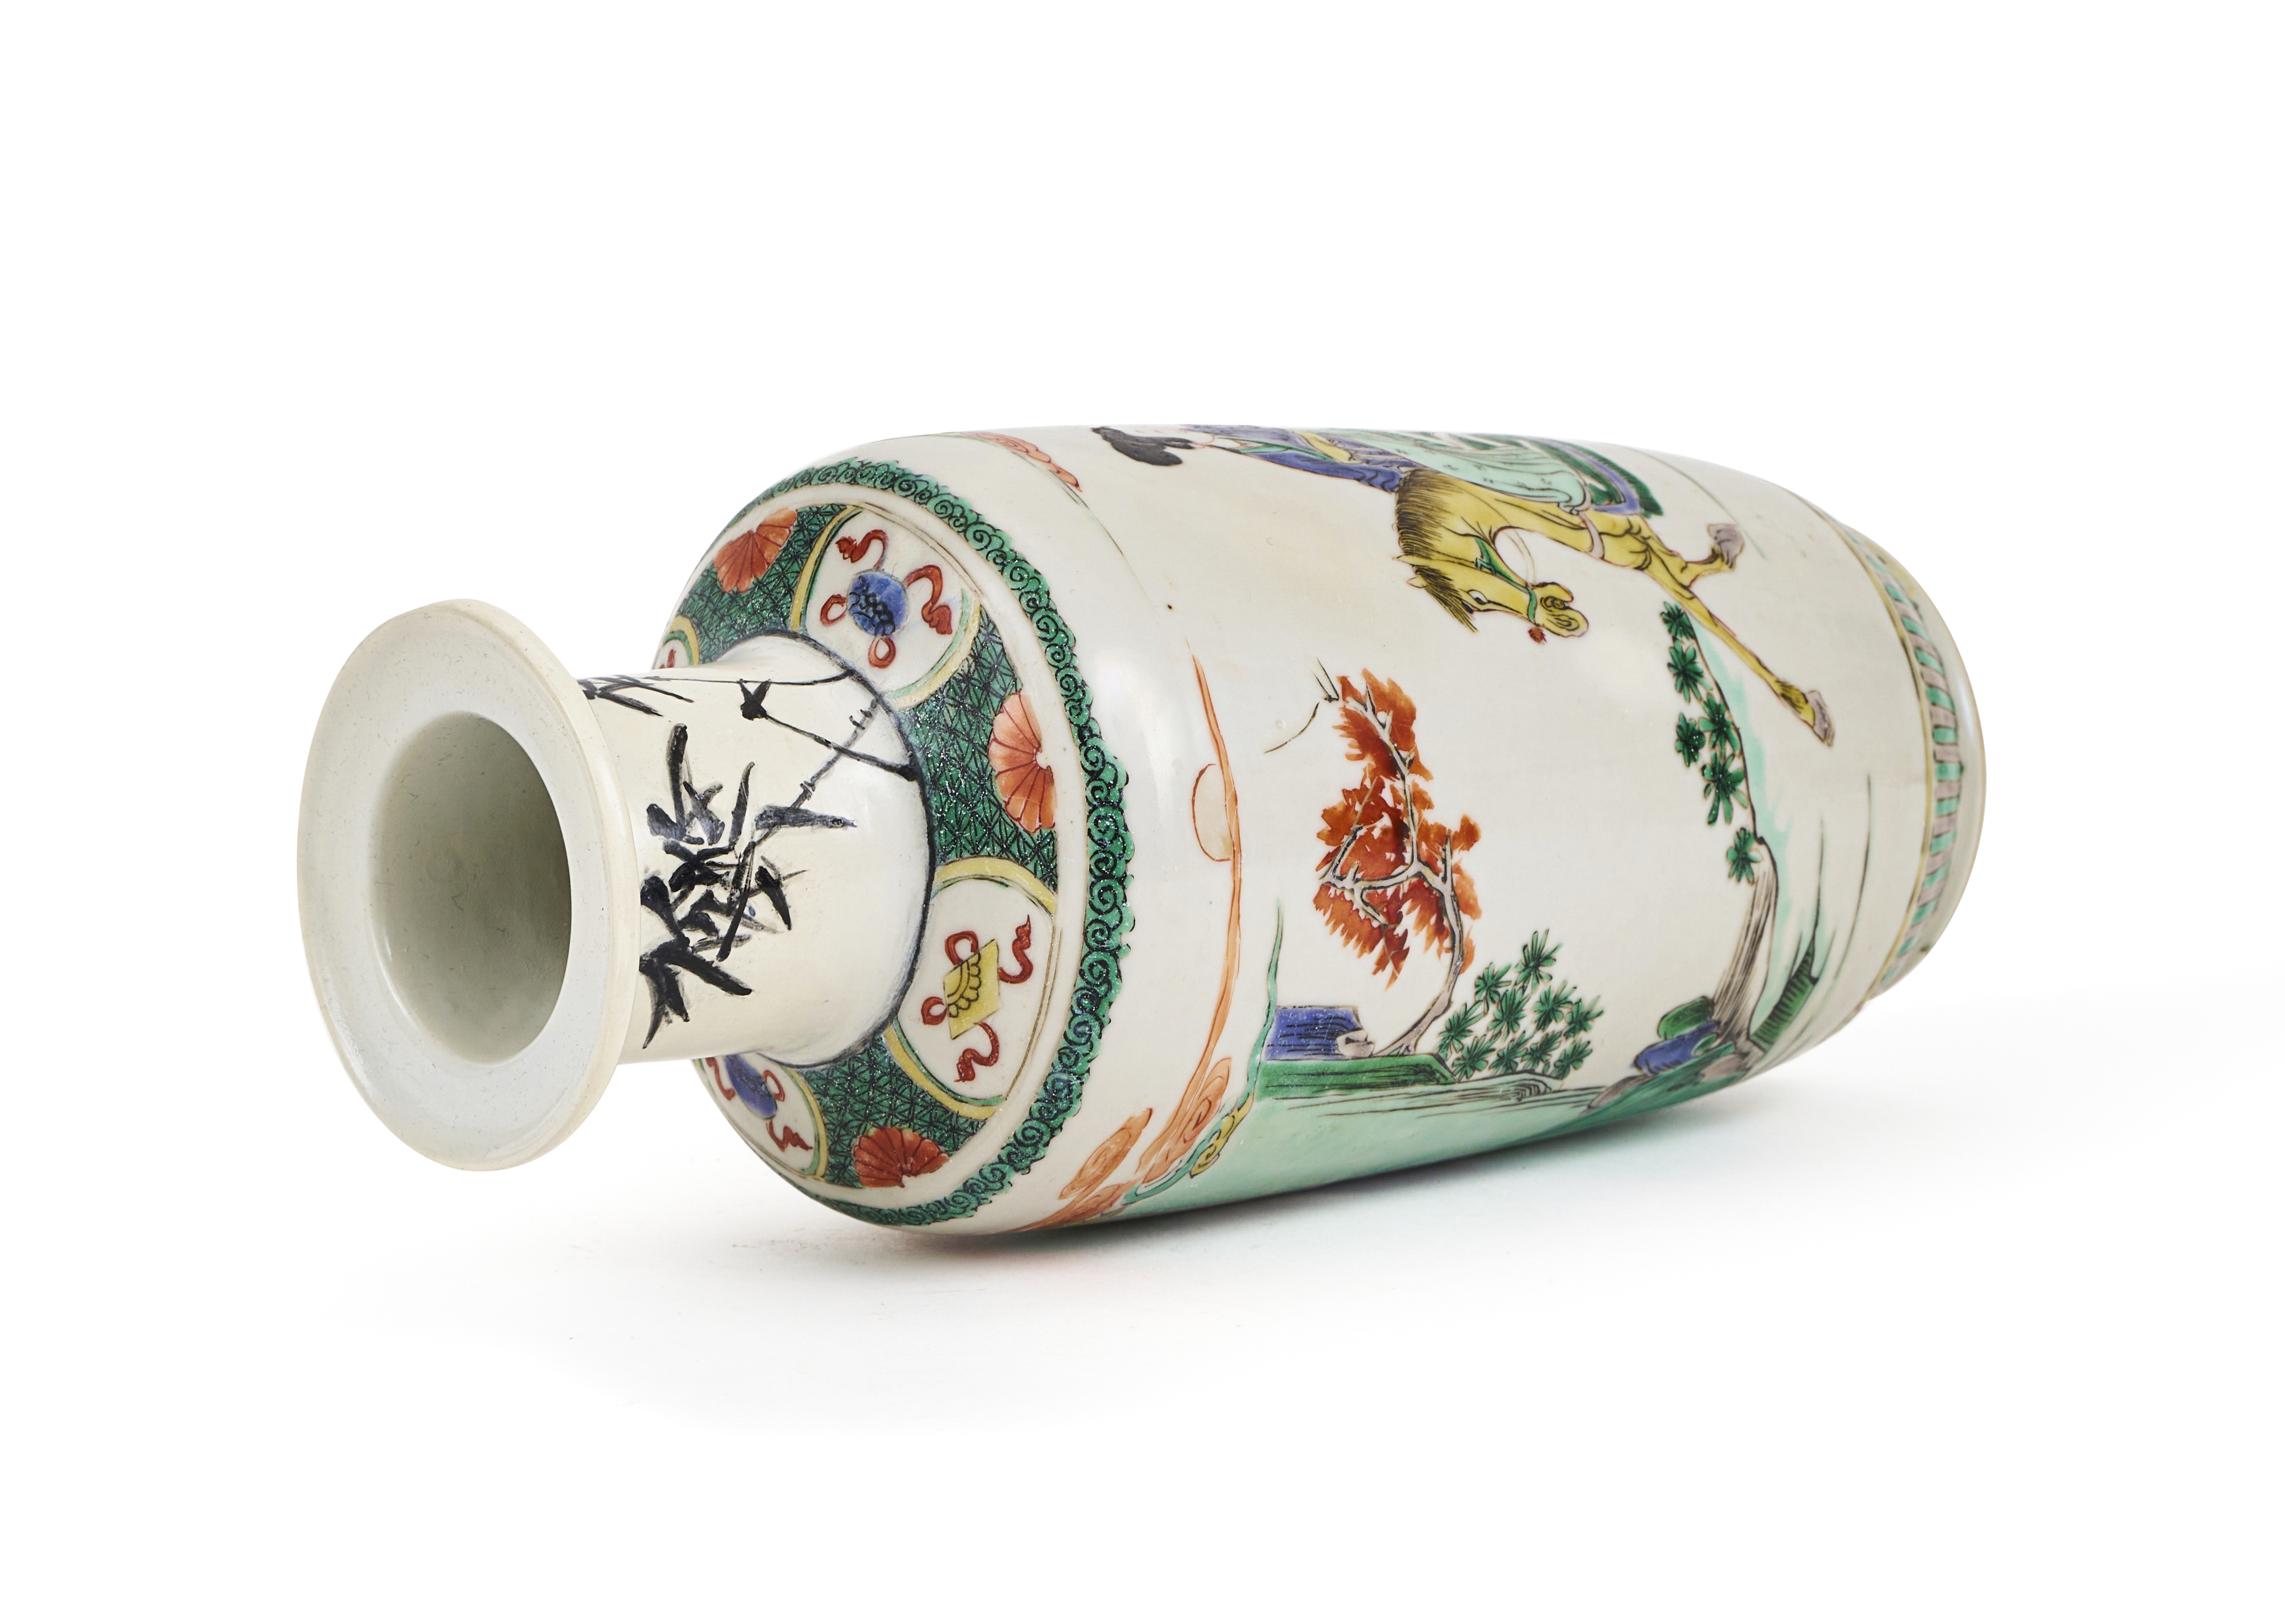 A CHINESE FAMILLE VERTE ROULEAU VASE, 18TH CENTURY - Image 5 of 5